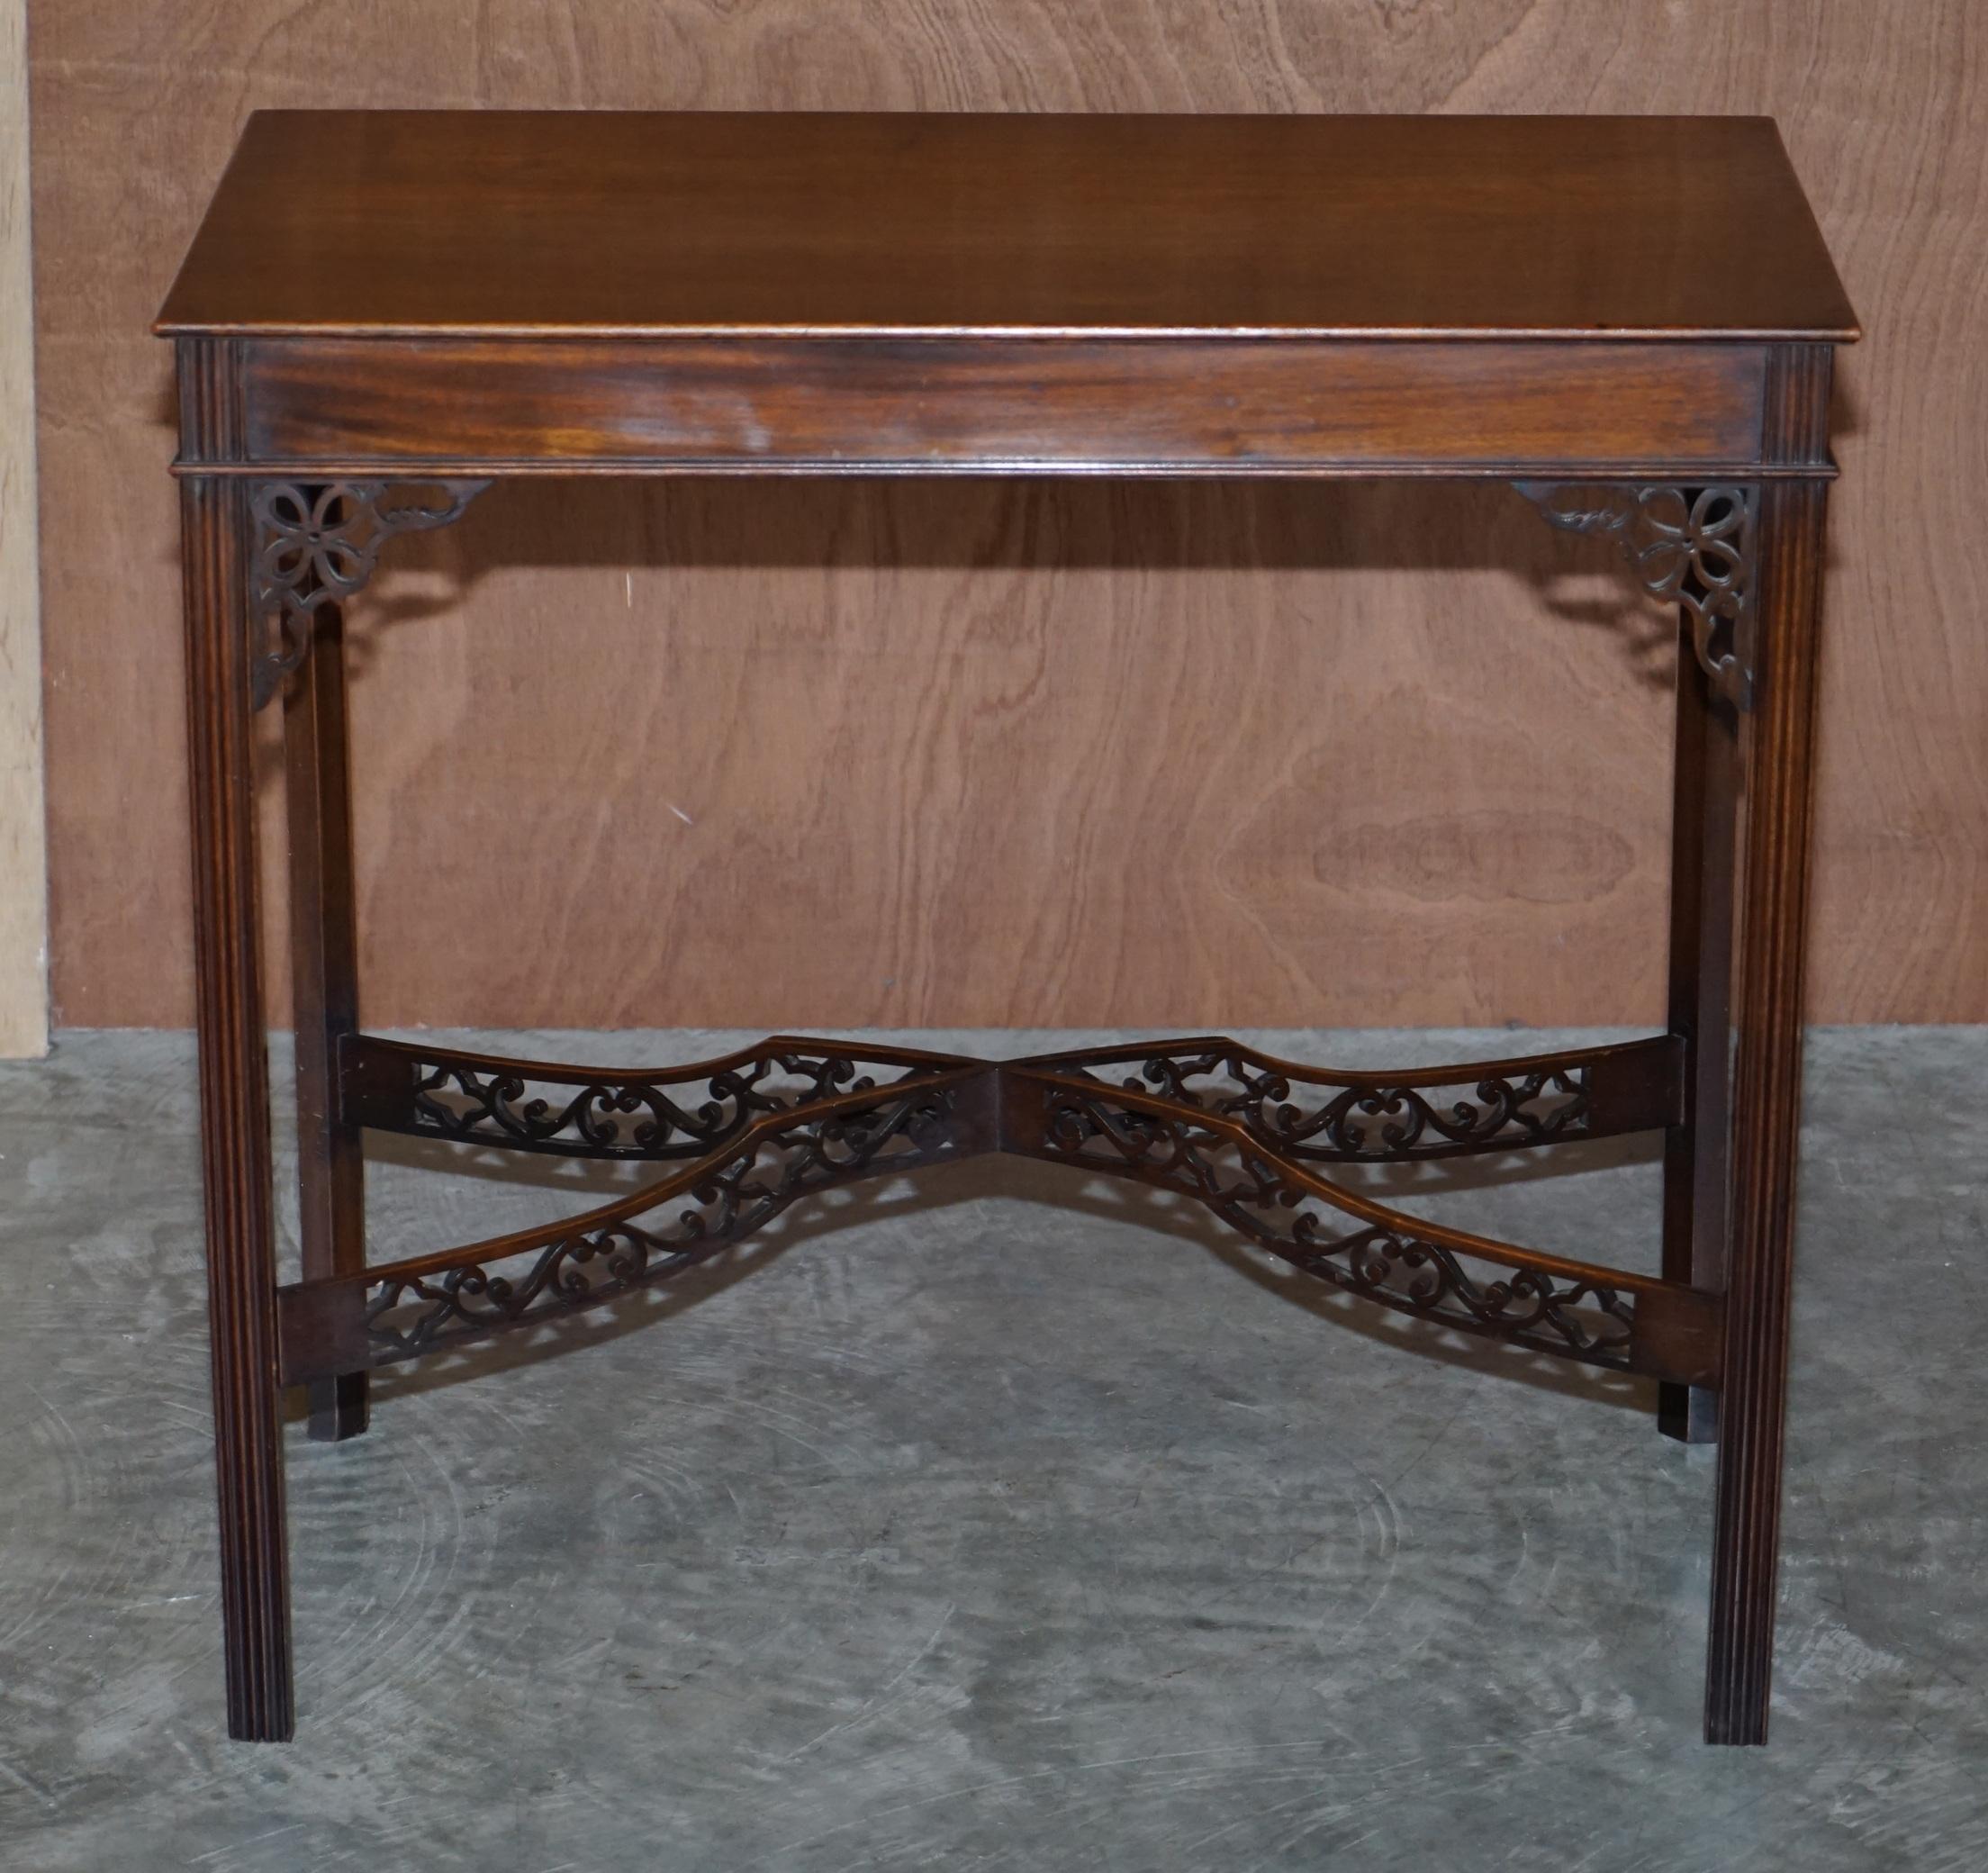 We are delighted to offer this very rare, restored, Thomas Chippendale style, Fret work carved, occasional silver tea table in Mahogany with serial number stamped base

This table is stunning, I would say late 19th, the timber patina is exquisite